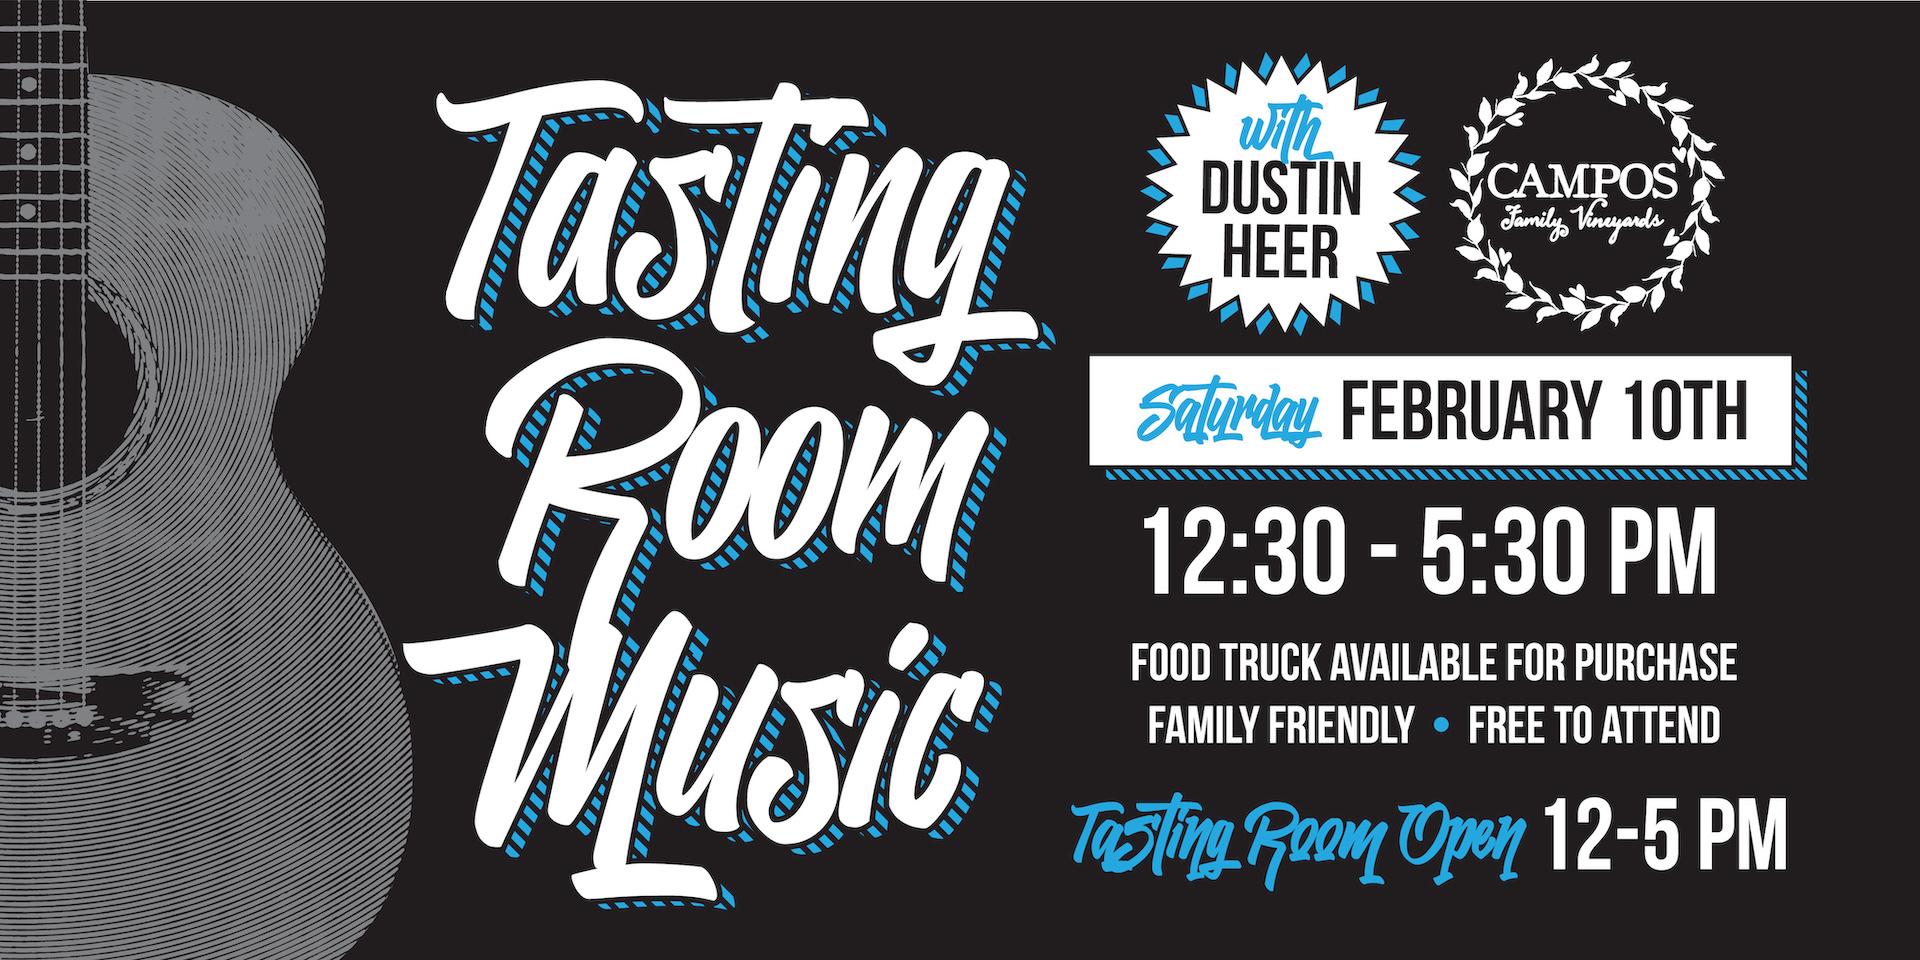 LIVE MUSIC with Dustin Heer!